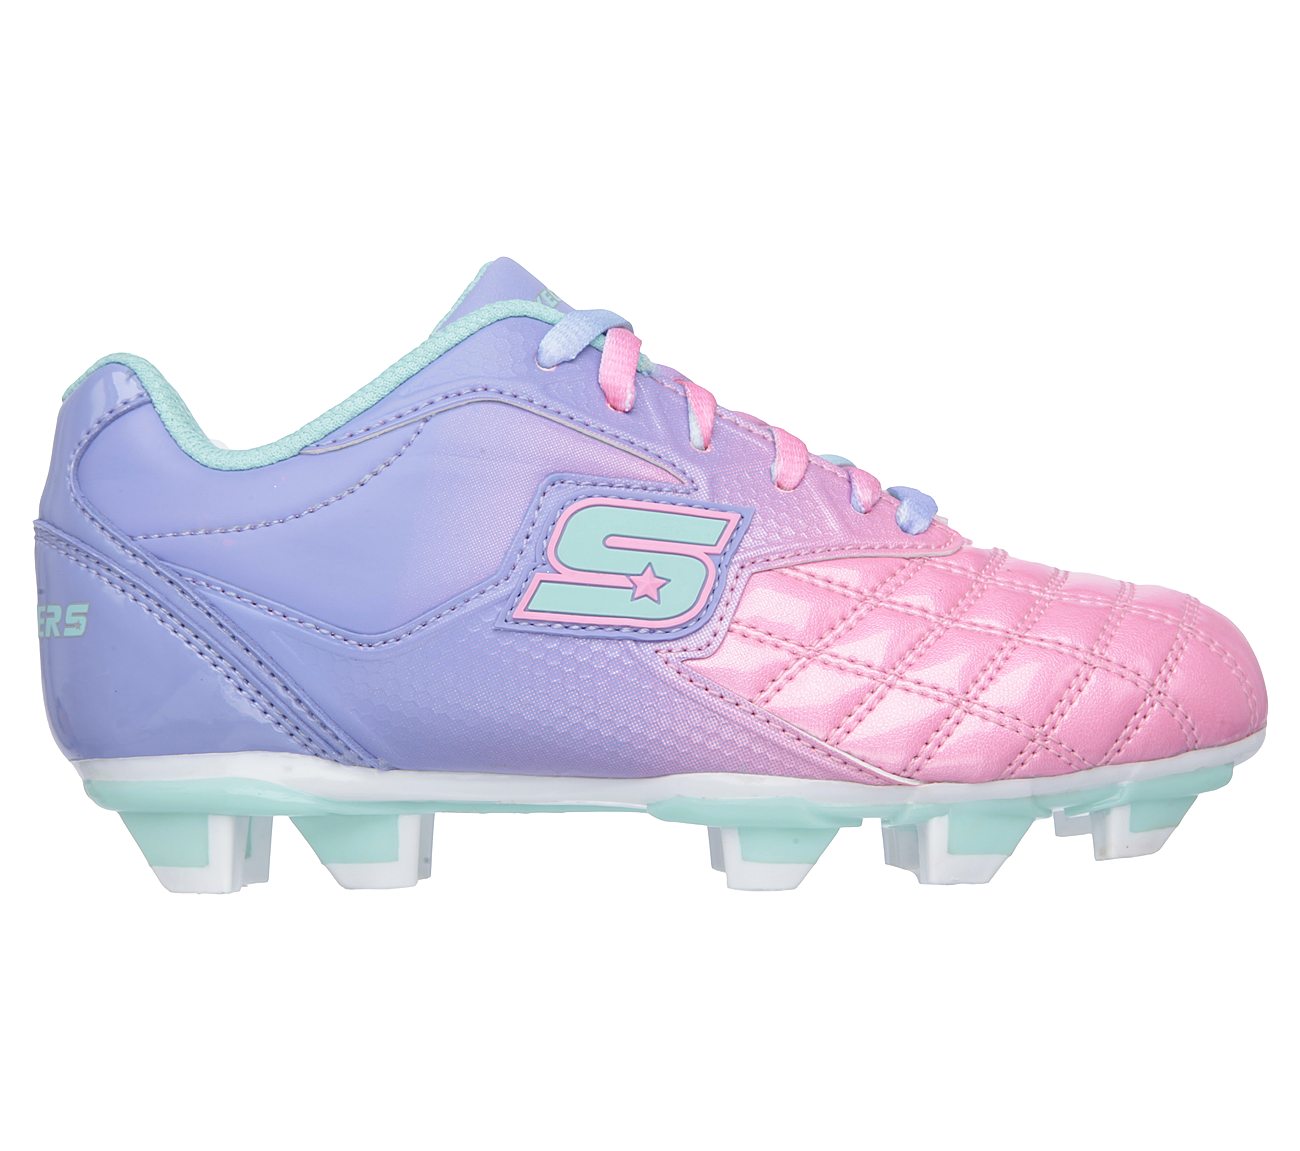 skechers soccer cleats Sale,up to 76 